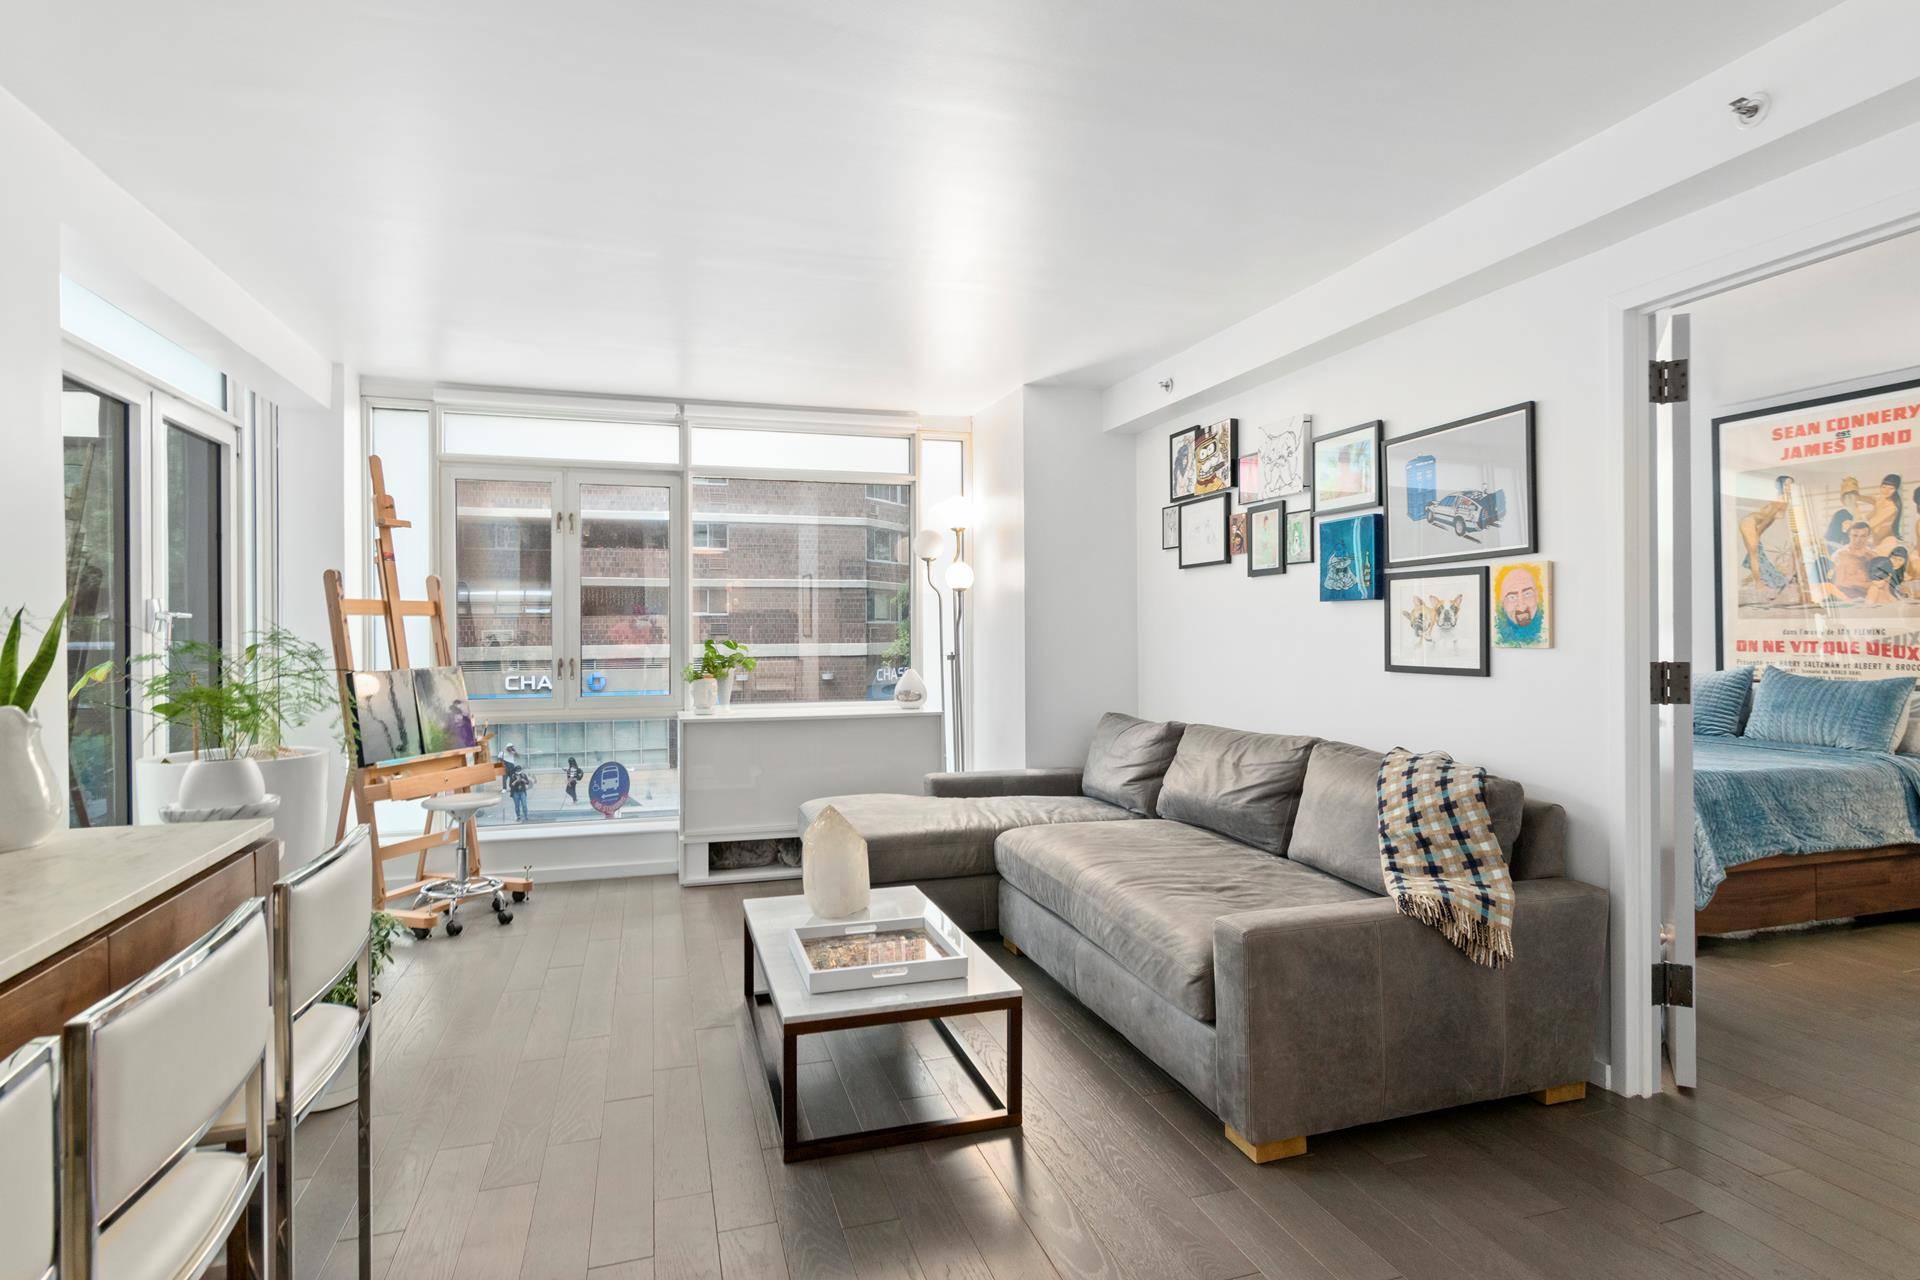 Welcome to Luxury ! Apartment 2B highlights 1, 190 square feet of immaculately designed living space, drenched in natural light with floor to ceiling windows and a setback terrace all ...